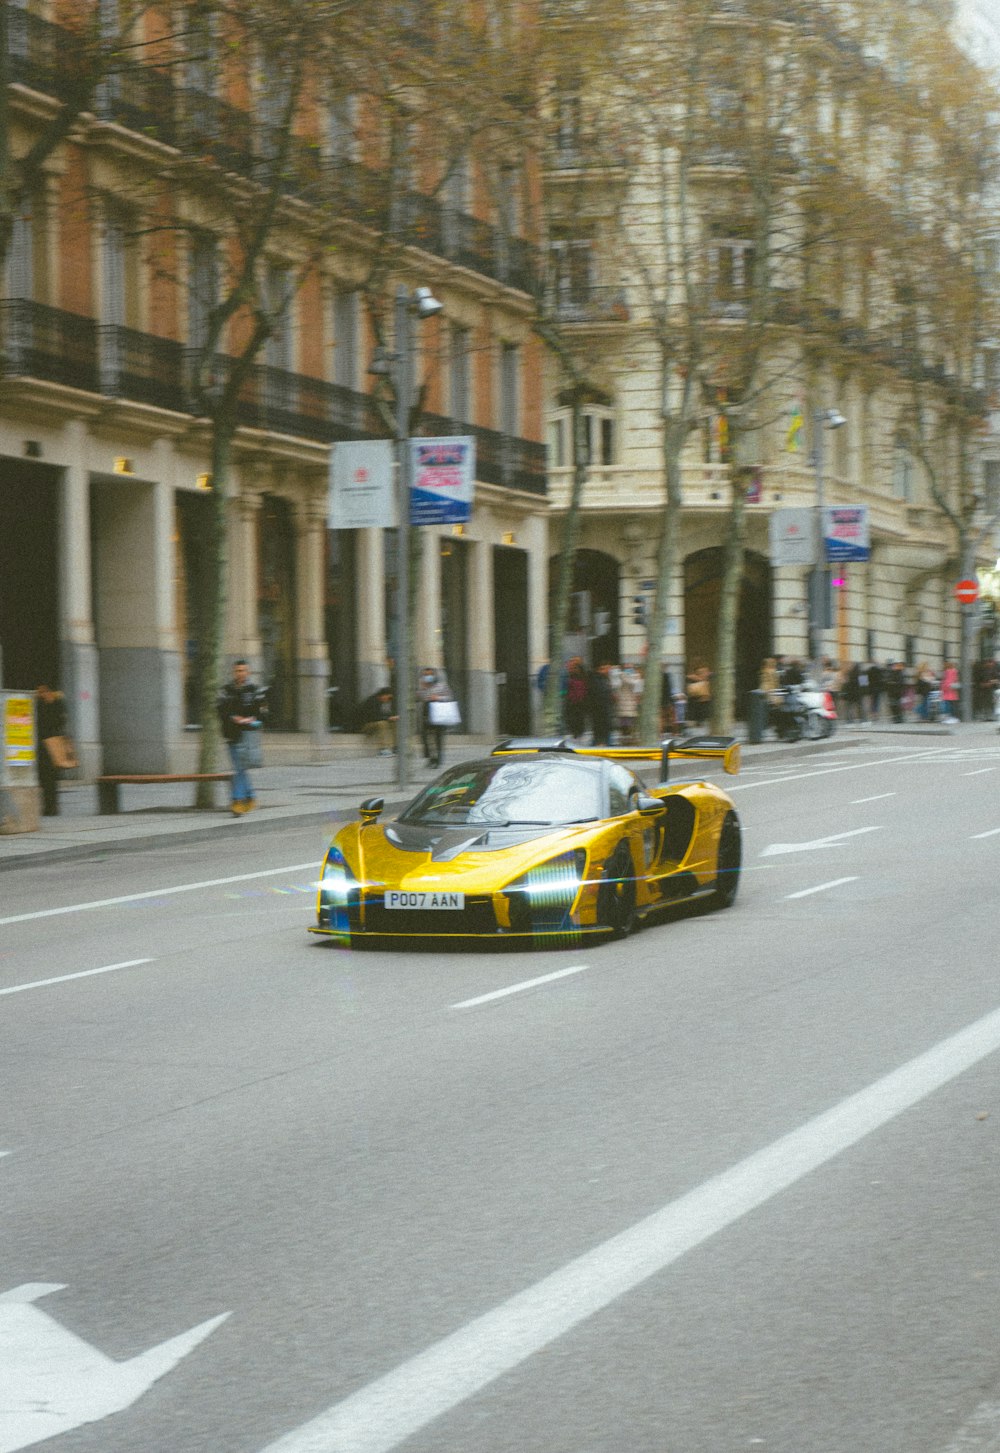 a yellow sports car driving down a city street